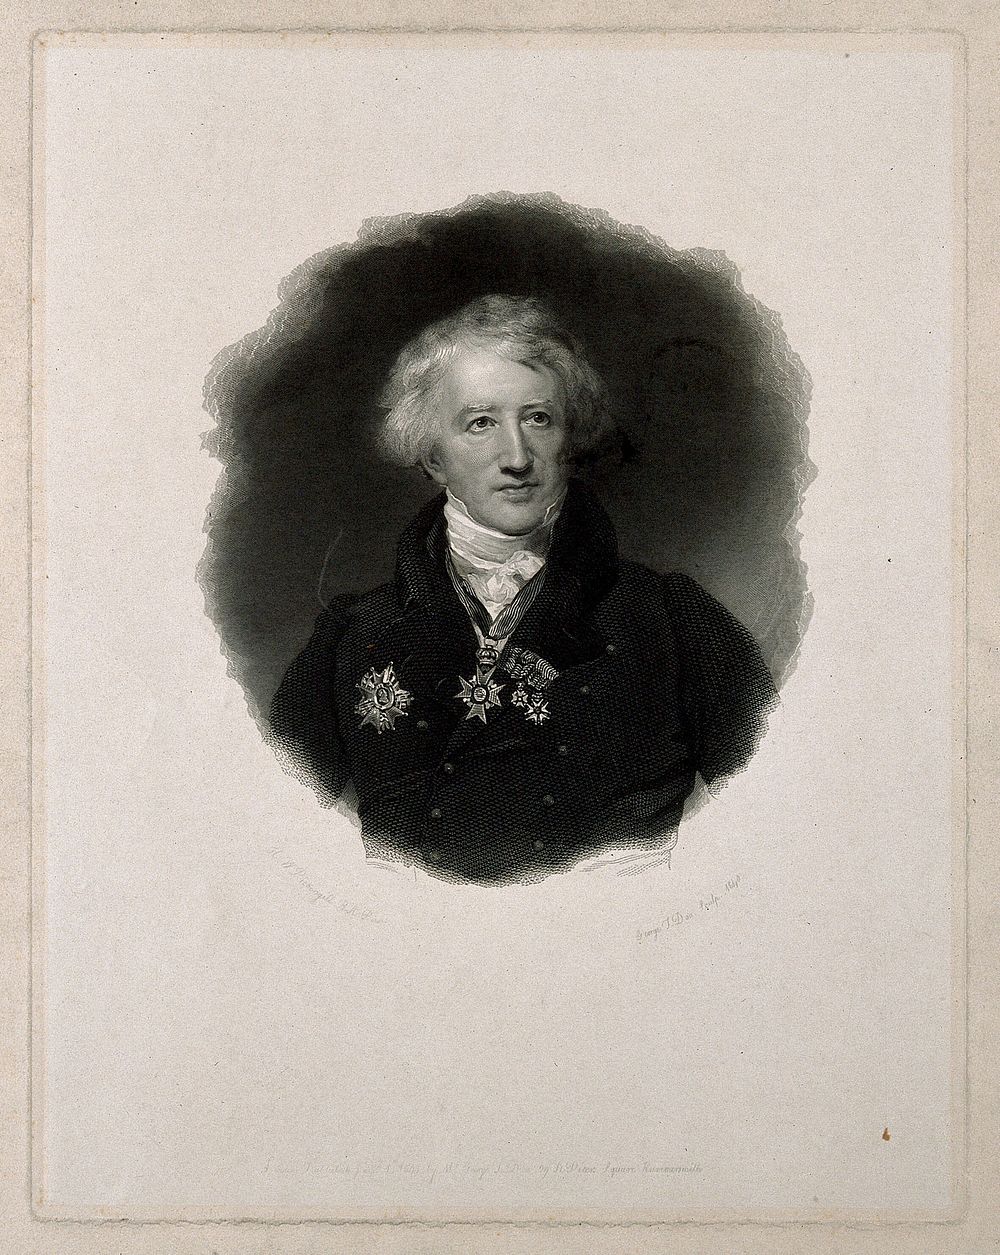 Georges-Léopold-Chrétien-Frédéric-Dagobert, Baron Cuvier. Line engraving by G. T. Doo, 1840, after H. W. Pickersgill, 1831.